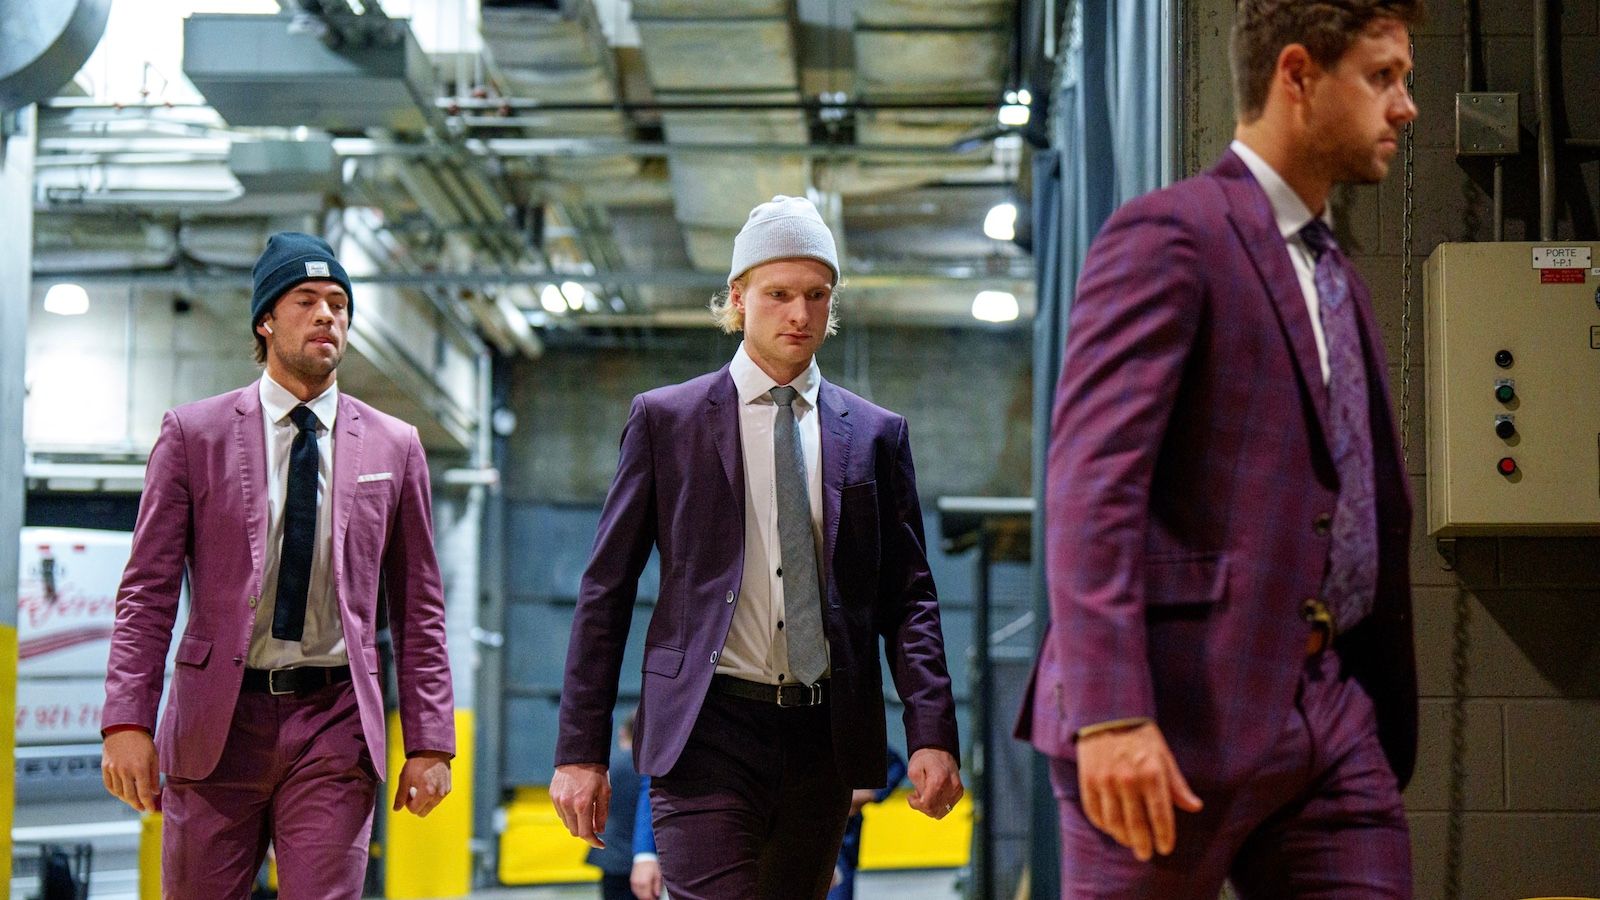 The NHL should abolish the suit and tie dress code